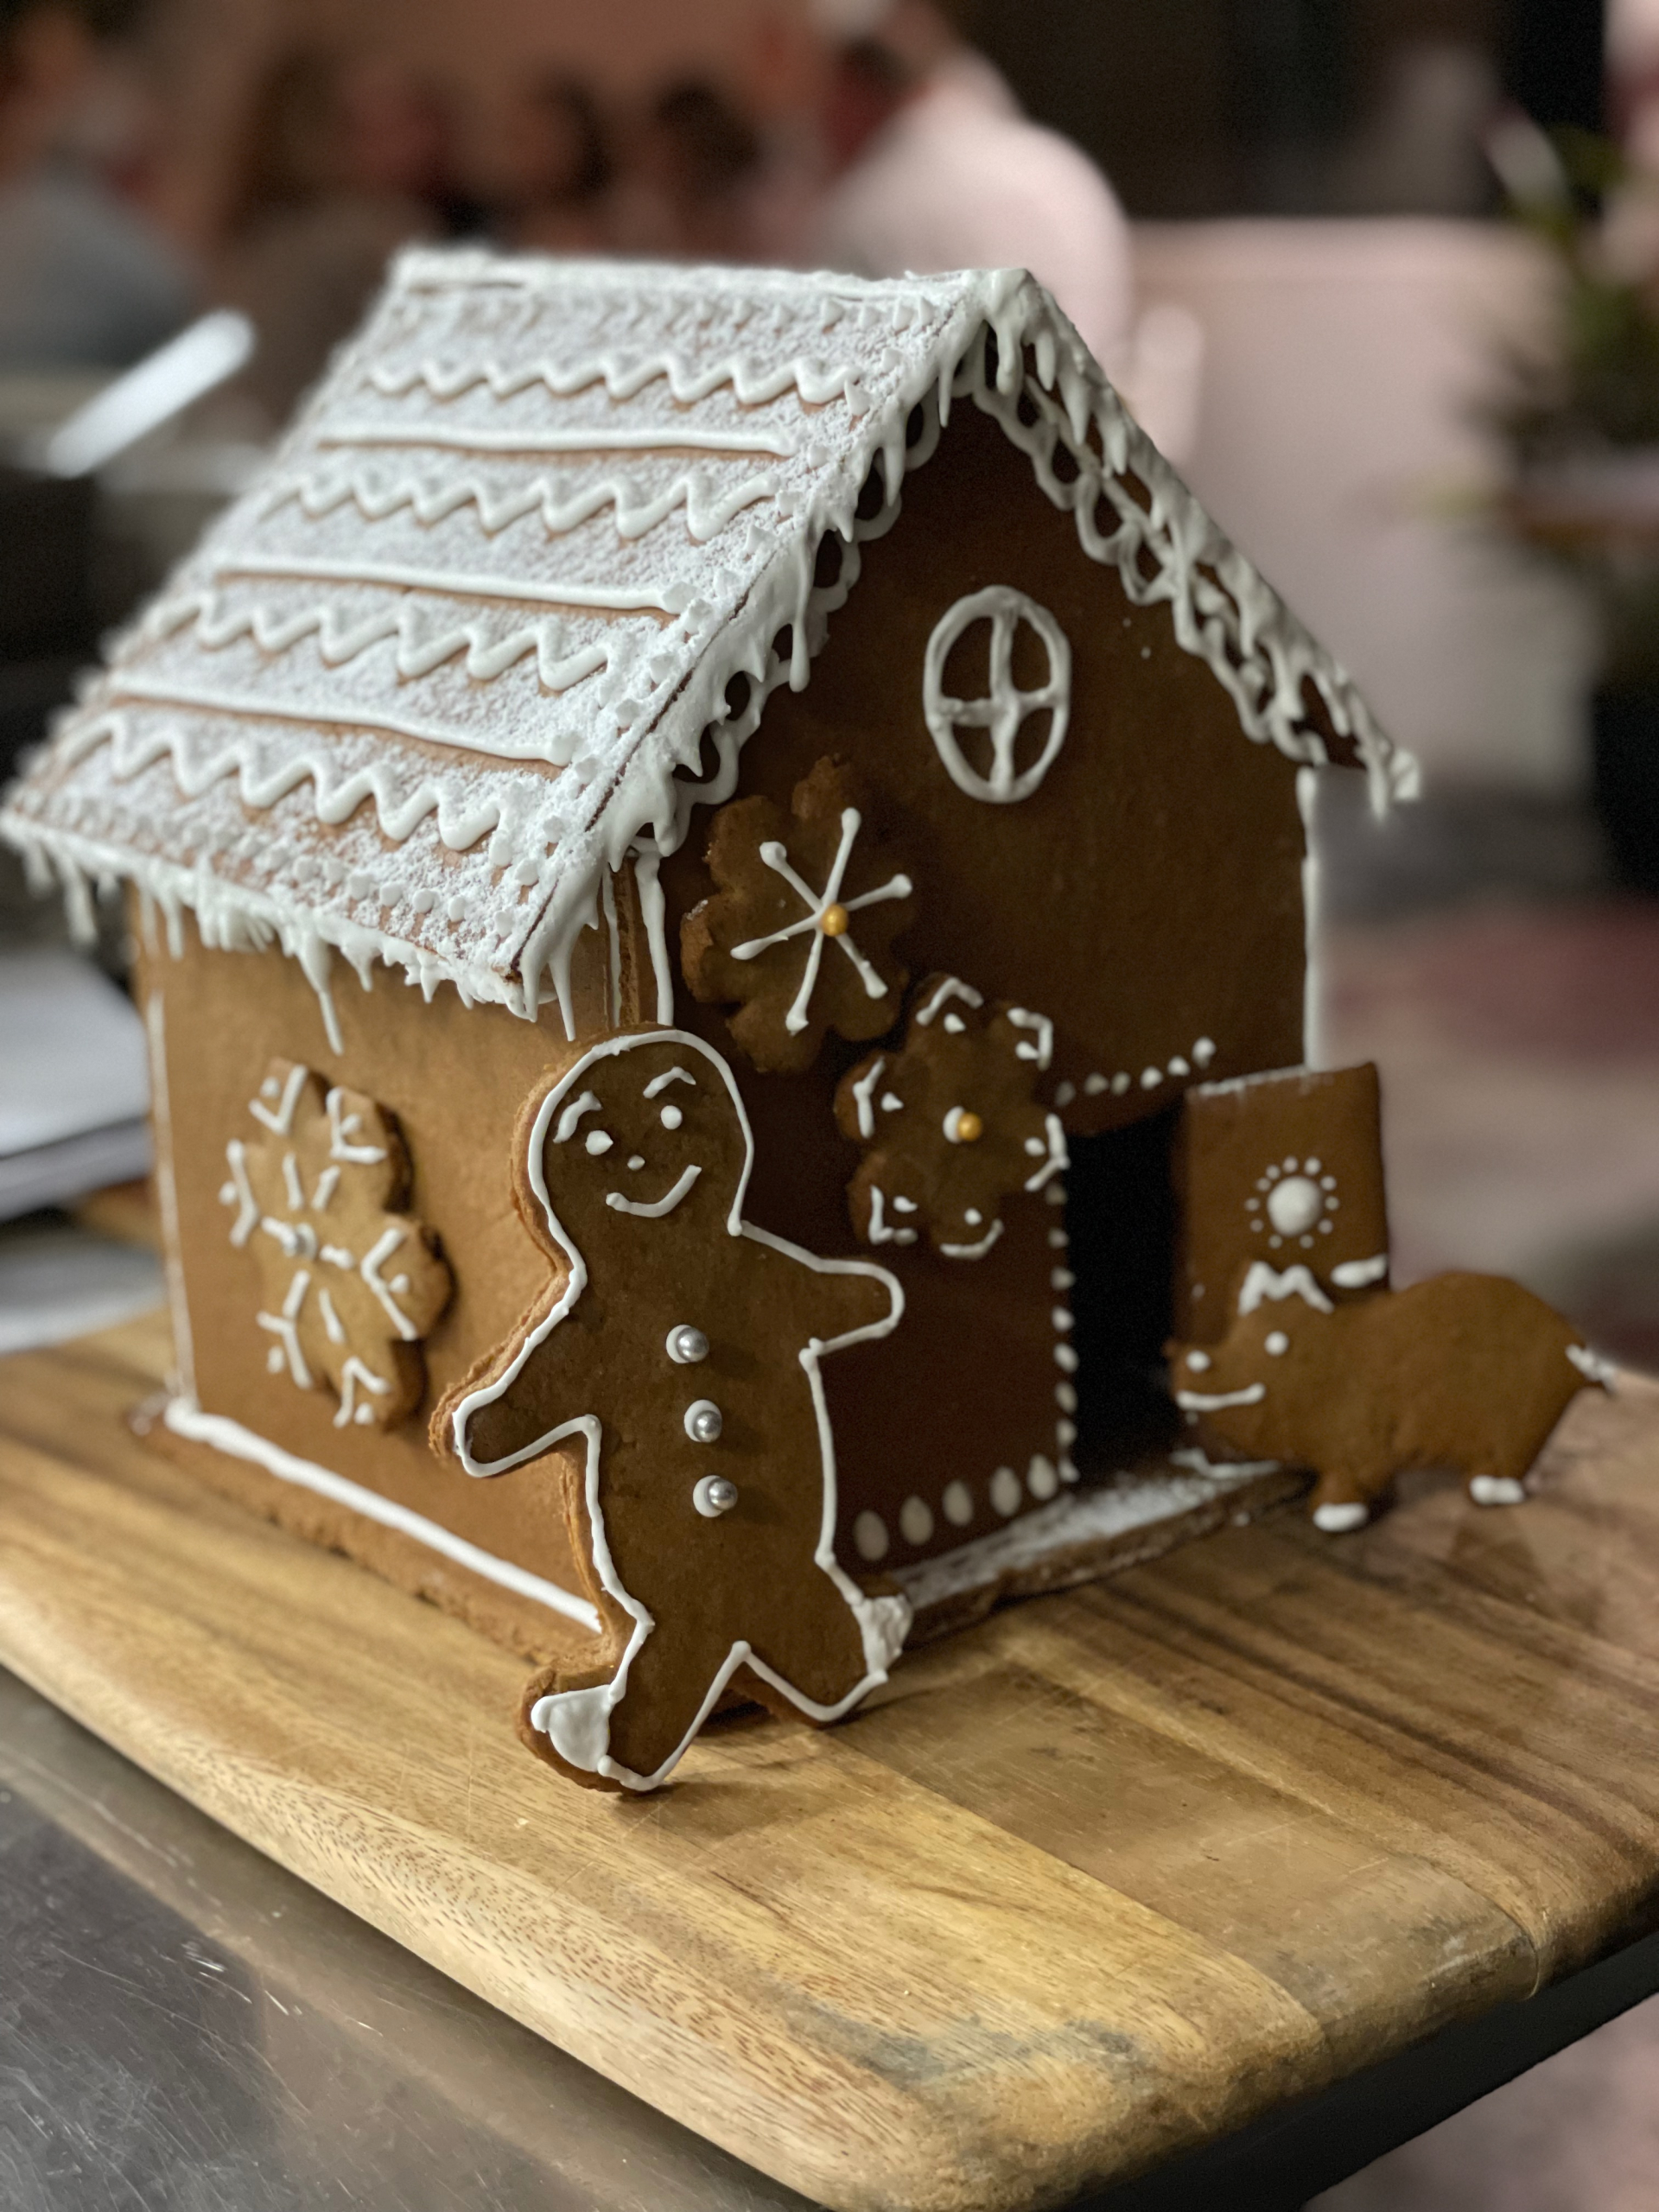 Make your own gingerbread house